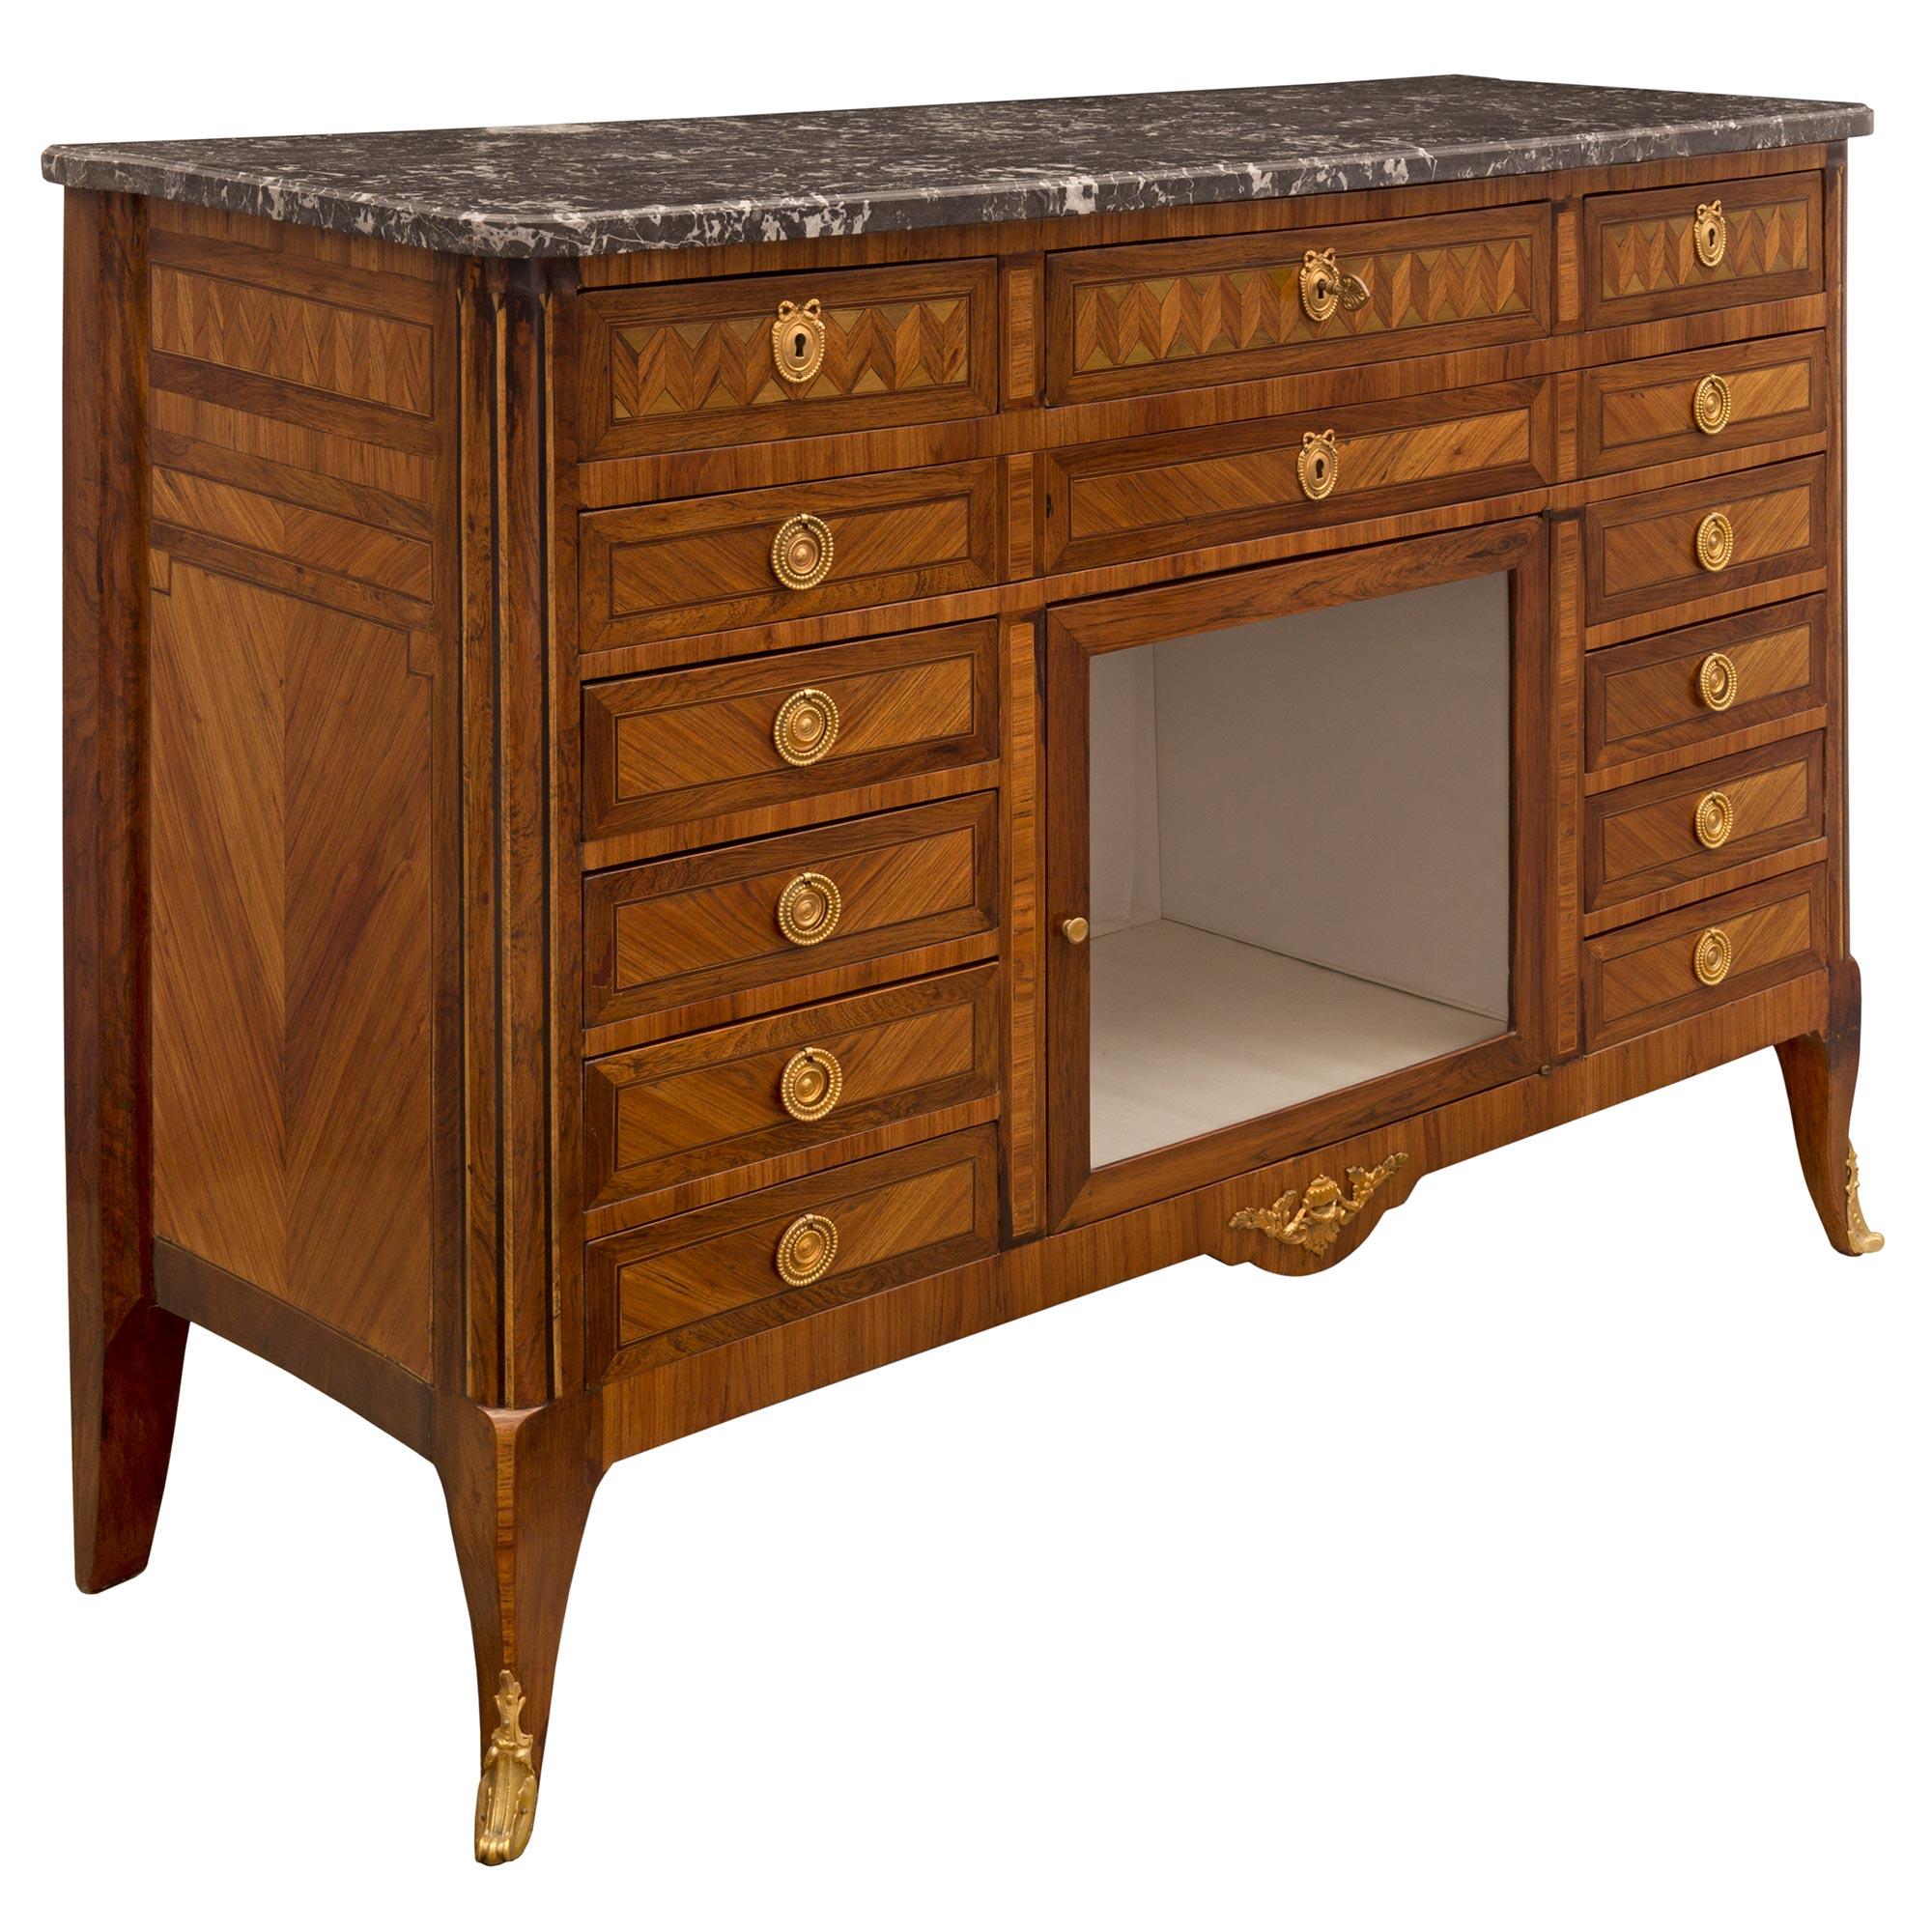 French Mid-19th Century Transitional St. Buffet Vitrine, Circa 1840 In Good Condition For Sale In West Palm Beach, FL